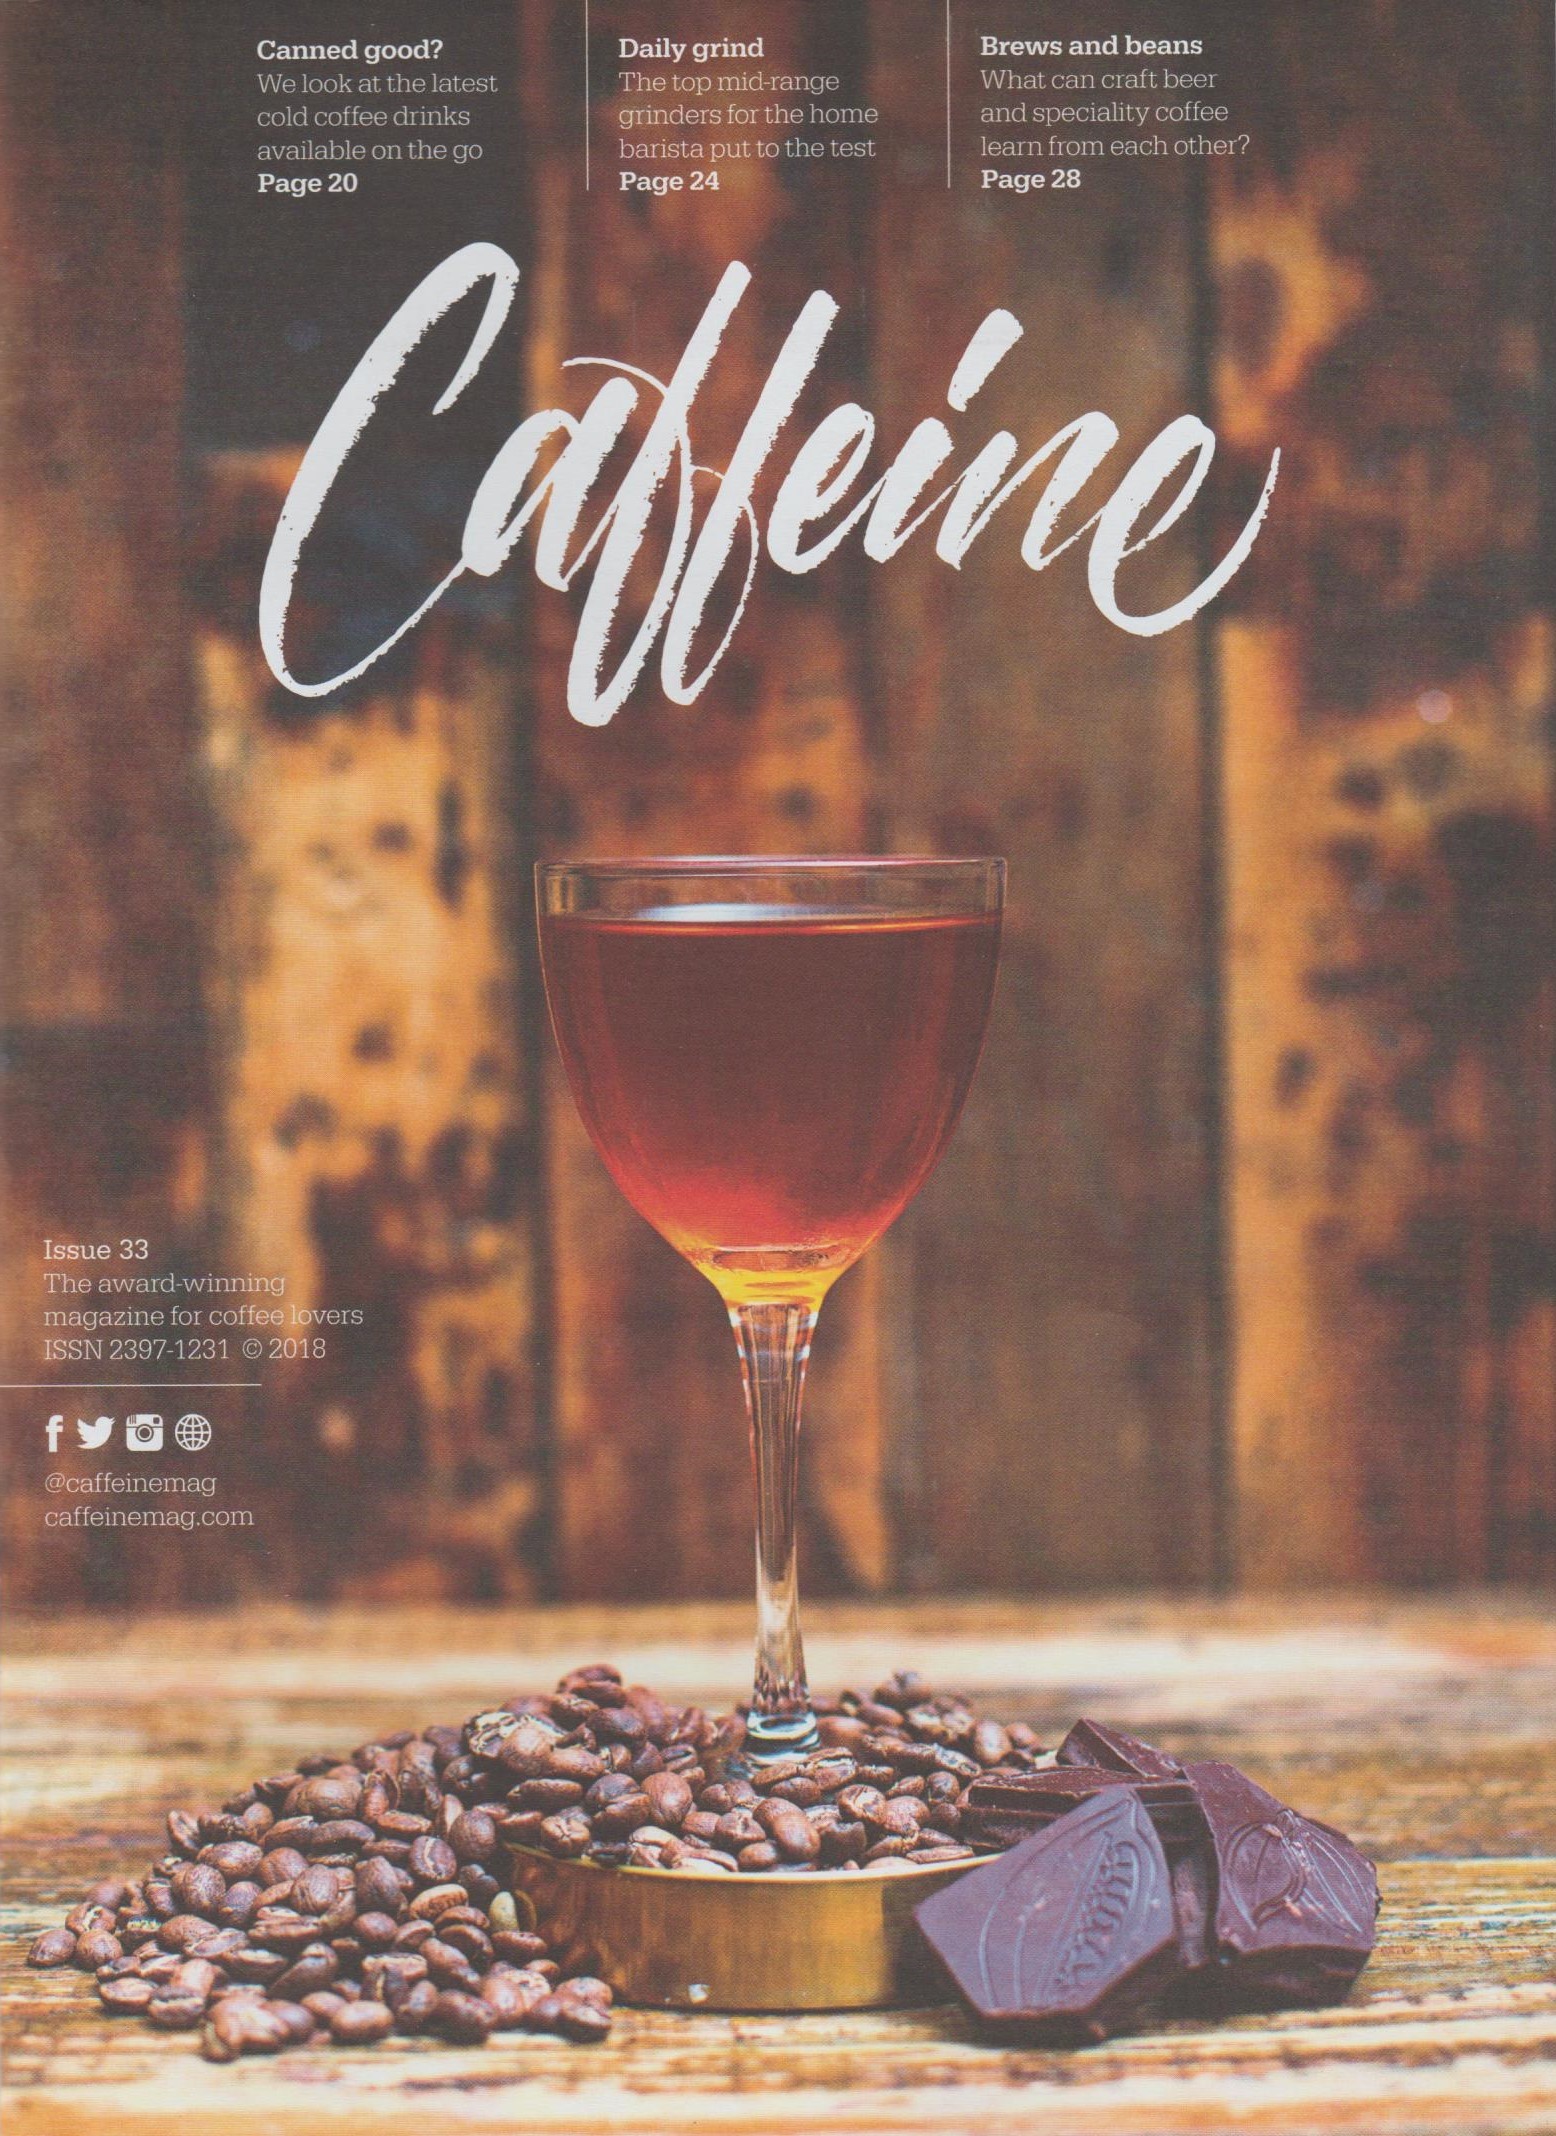 Caffeine Magazine ushers in the arrival of summer with its cover to Issue 33.